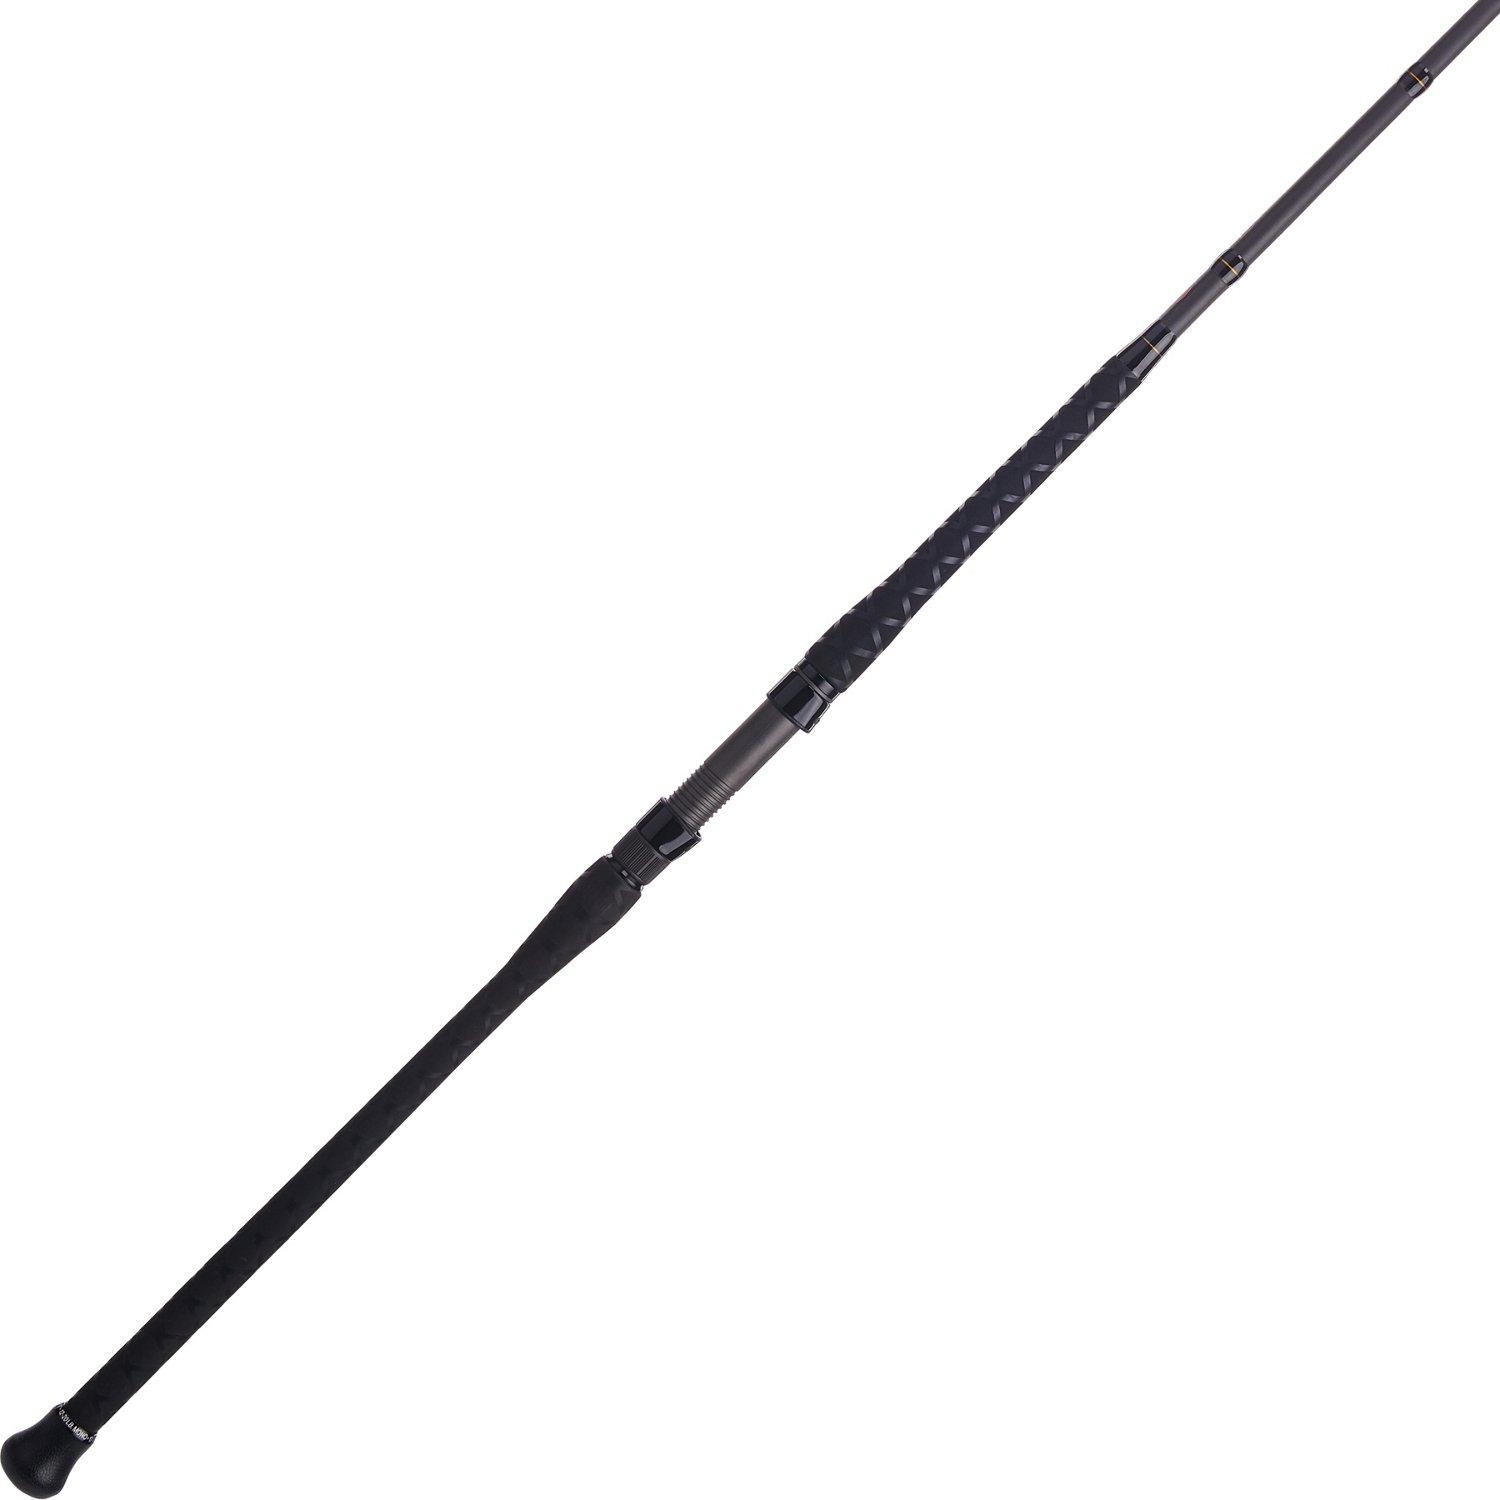 Olympic10ft Surf Fishing rod and South Bend reel - sporting goods